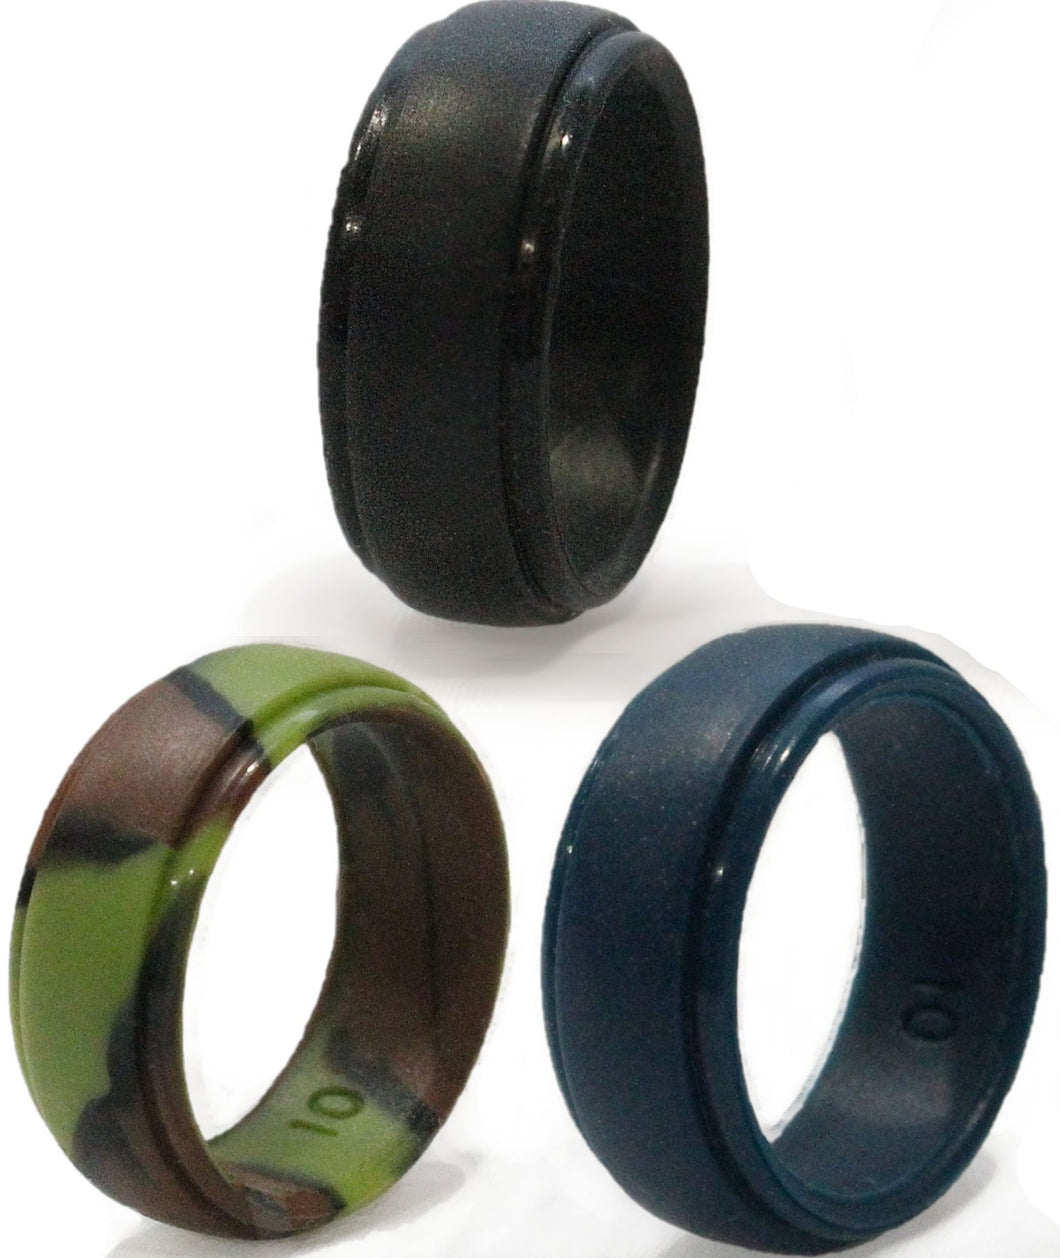 Silicone Wedding Rings for Men Four Color Pack Black Blue Camo White